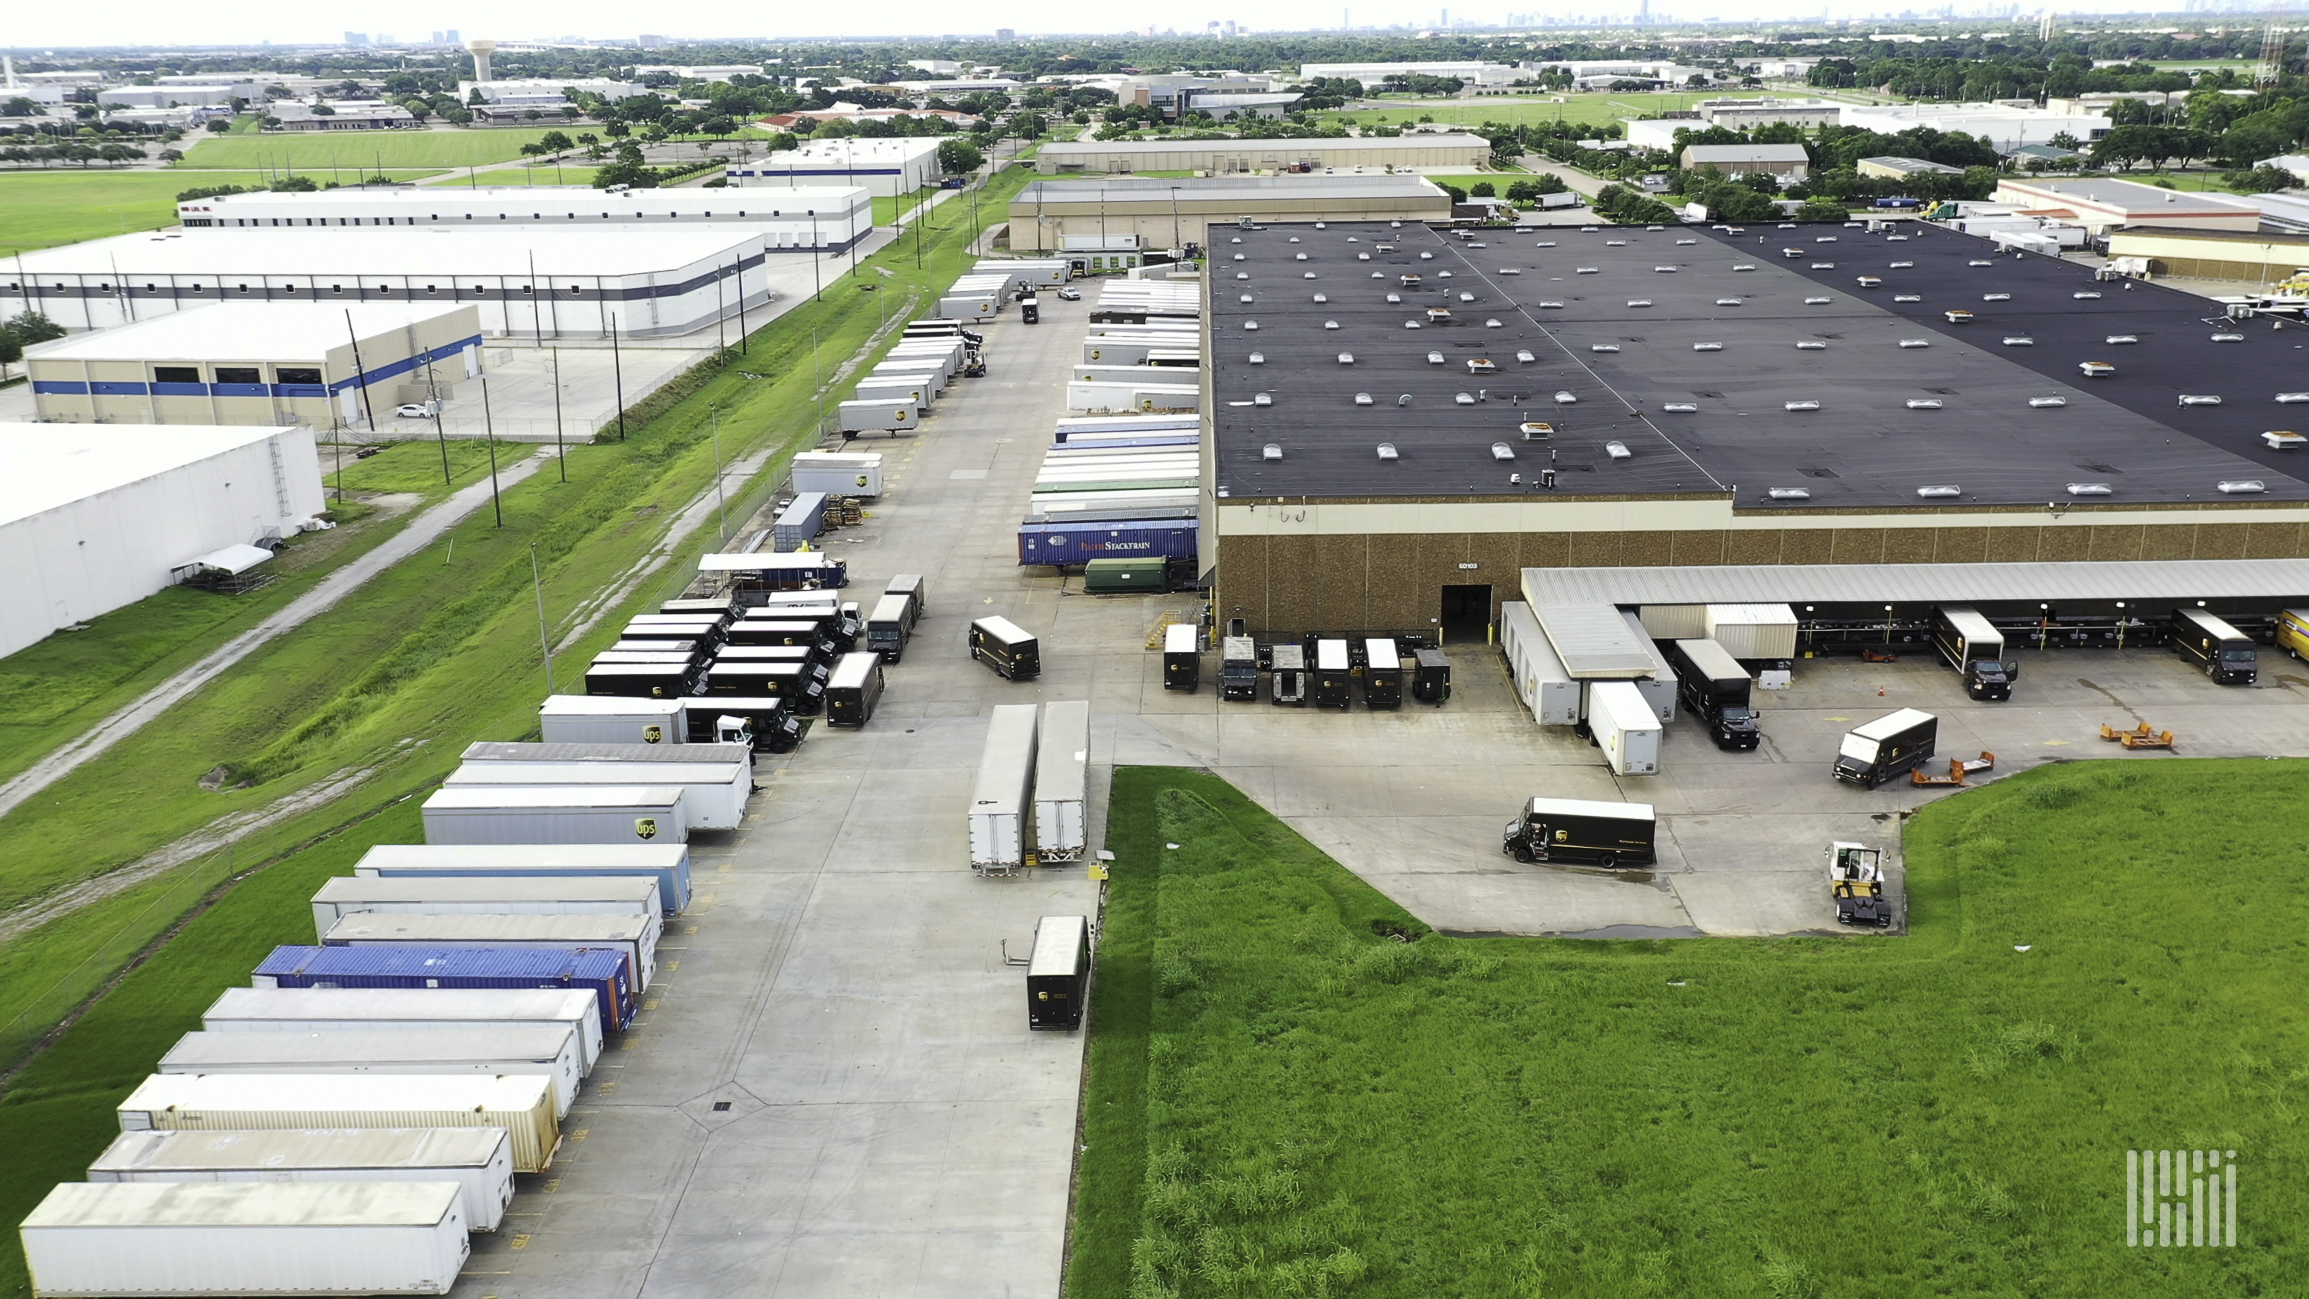 Warehouse space at a premium as investment heats up